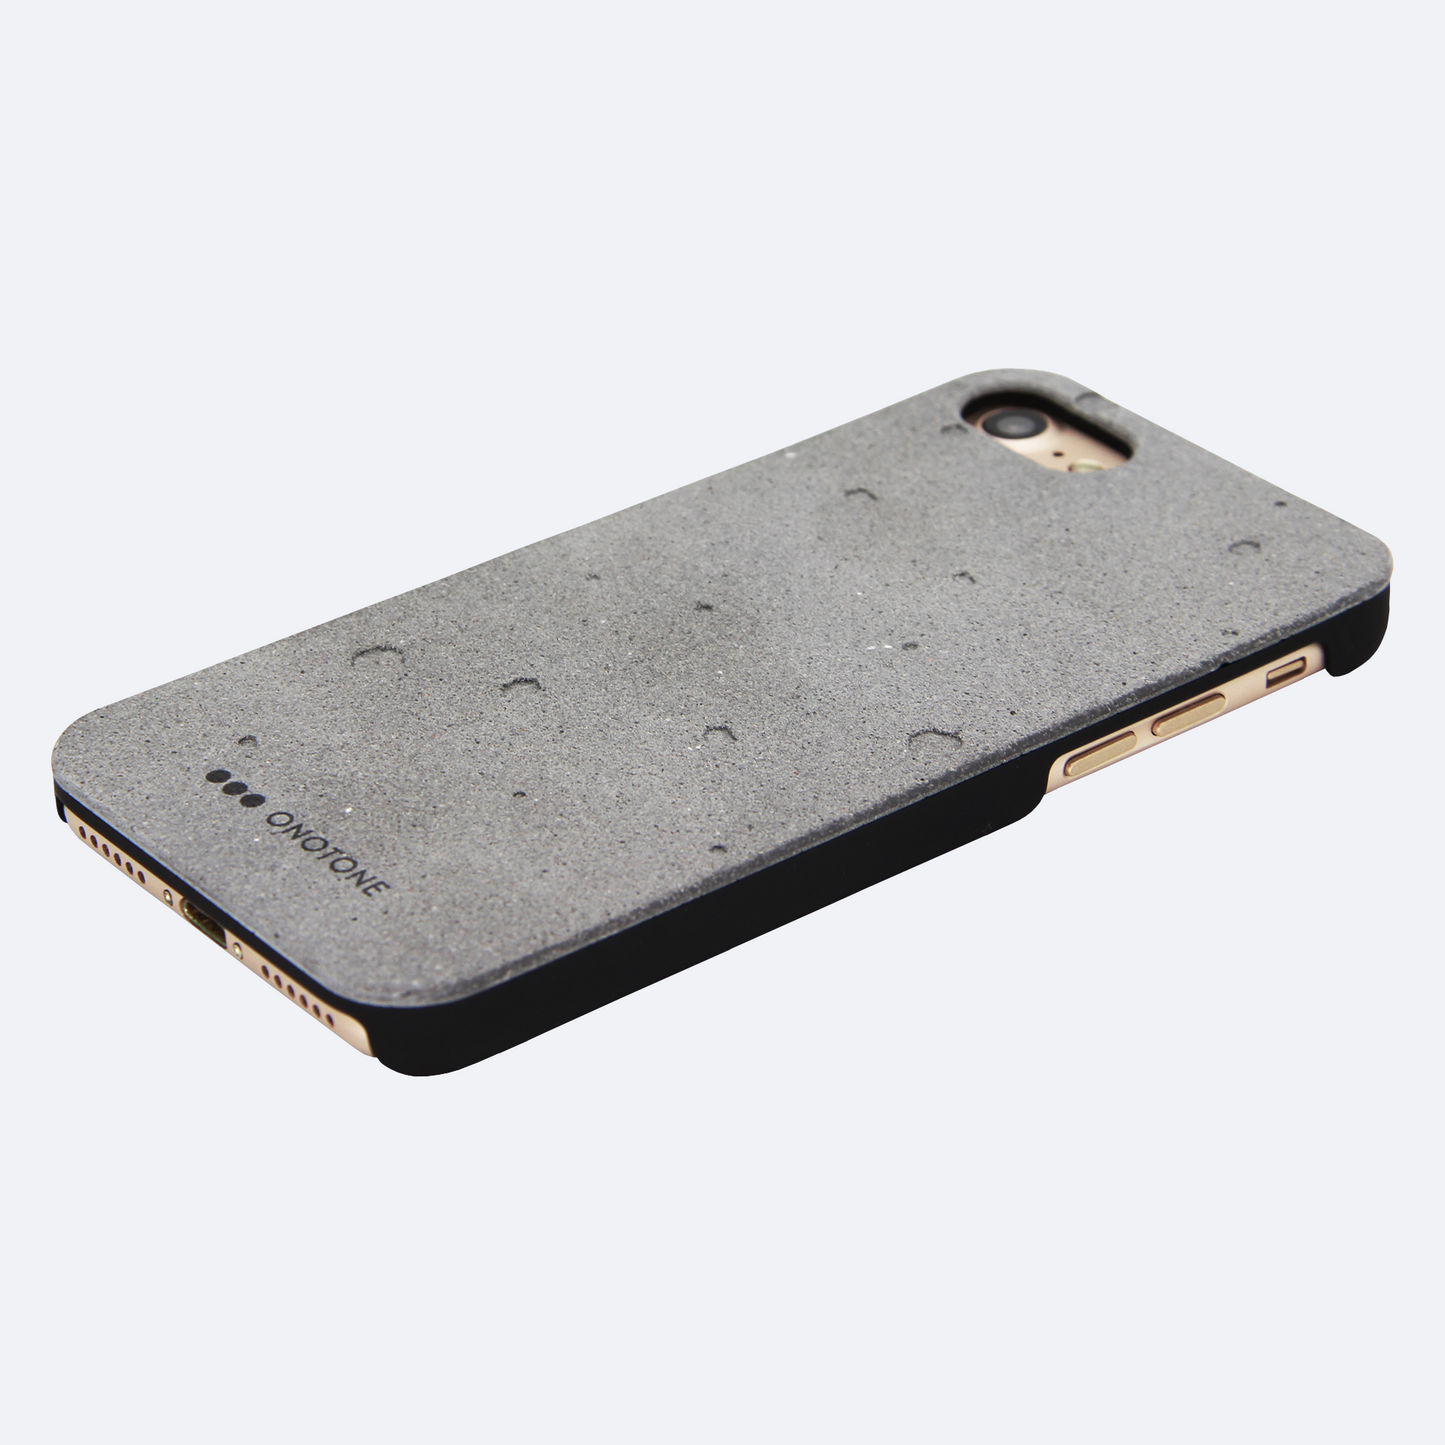 real concrete iPhone cases